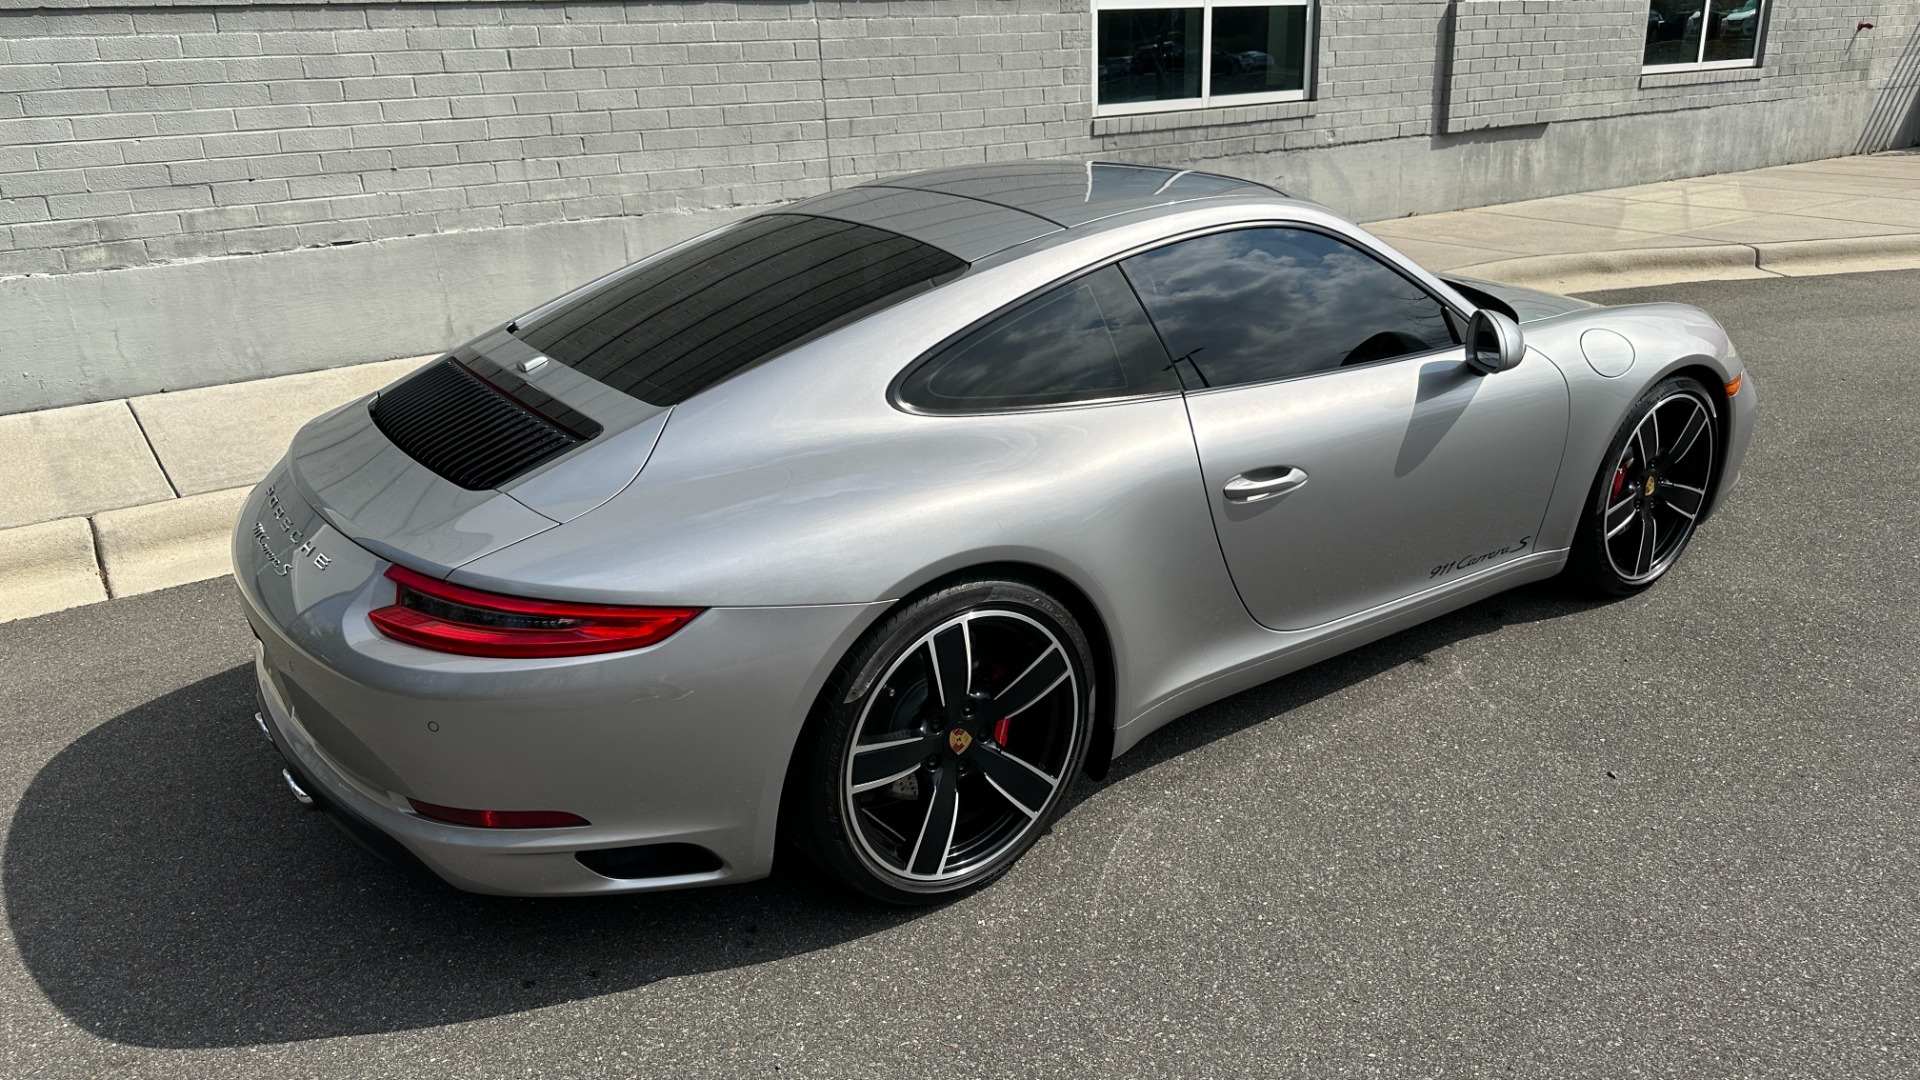 Used 2017 Porsche 911 CARRERA S / PDK / SPORT PLUS INTERIOR / SPORT EXHAUST / PASM SUSPENSION for sale Sold at Formula Imports in Charlotte NC 28227 5